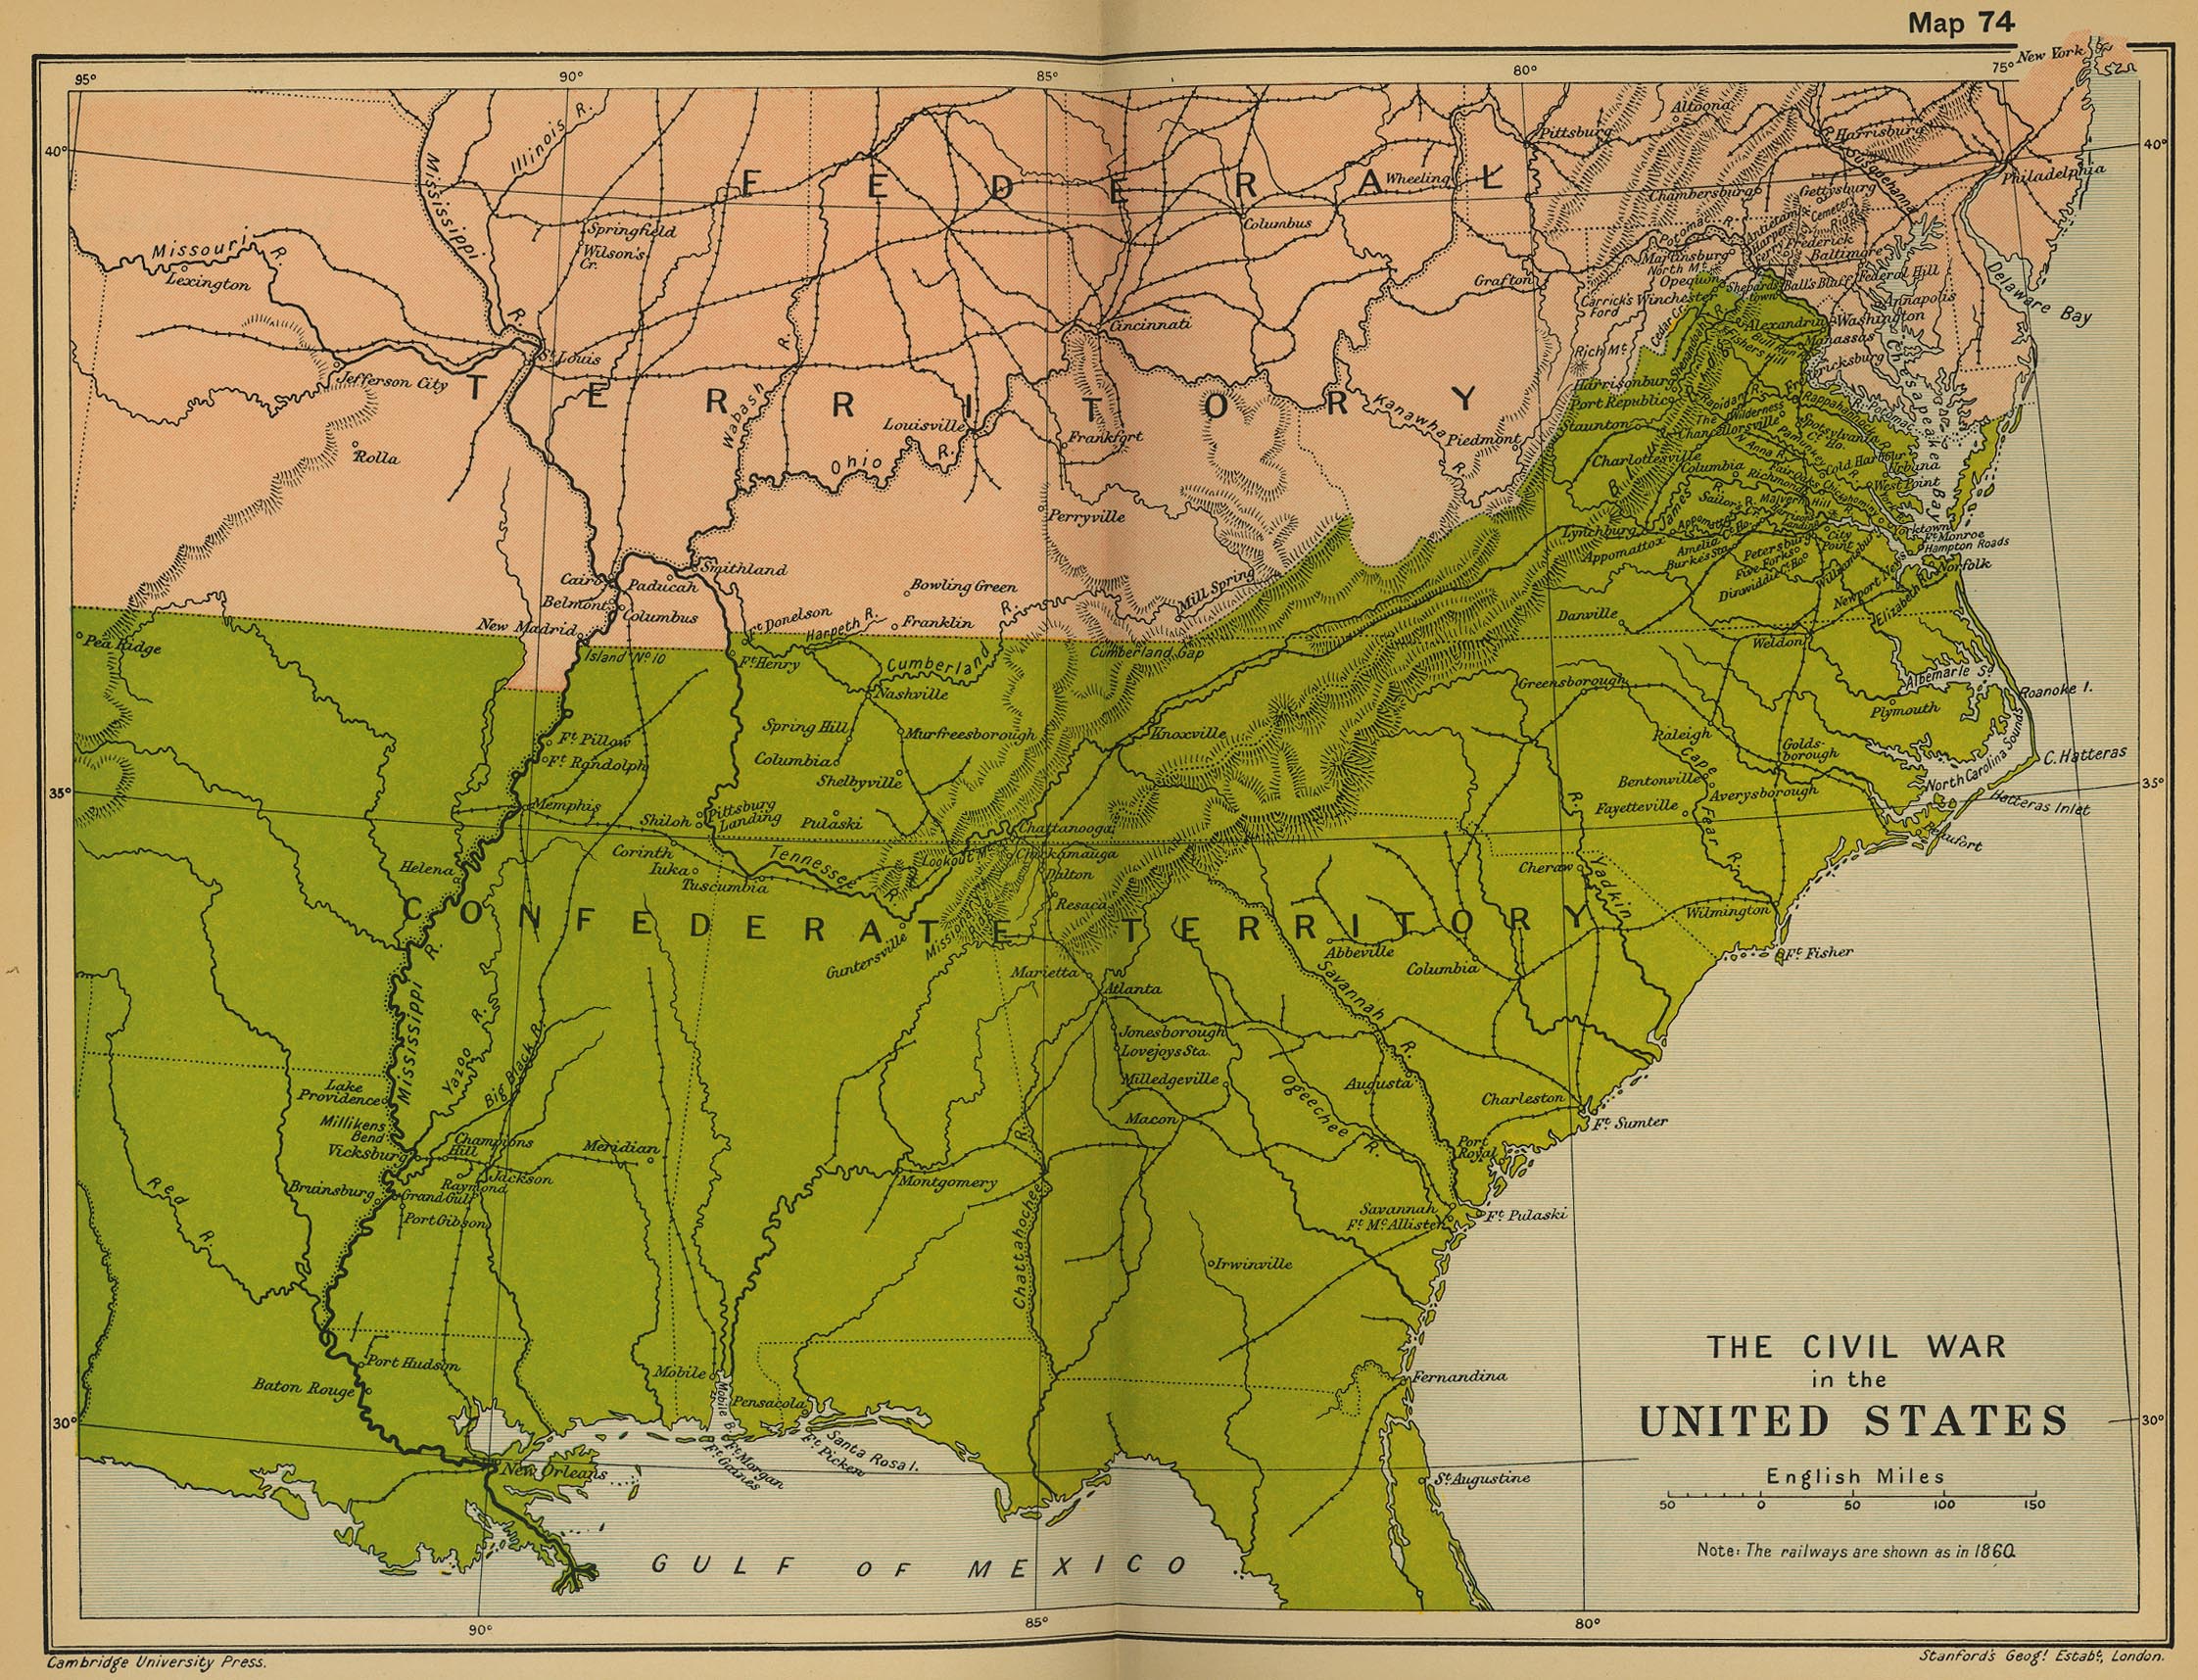 Map of the Civil War in the United States 1861-1865